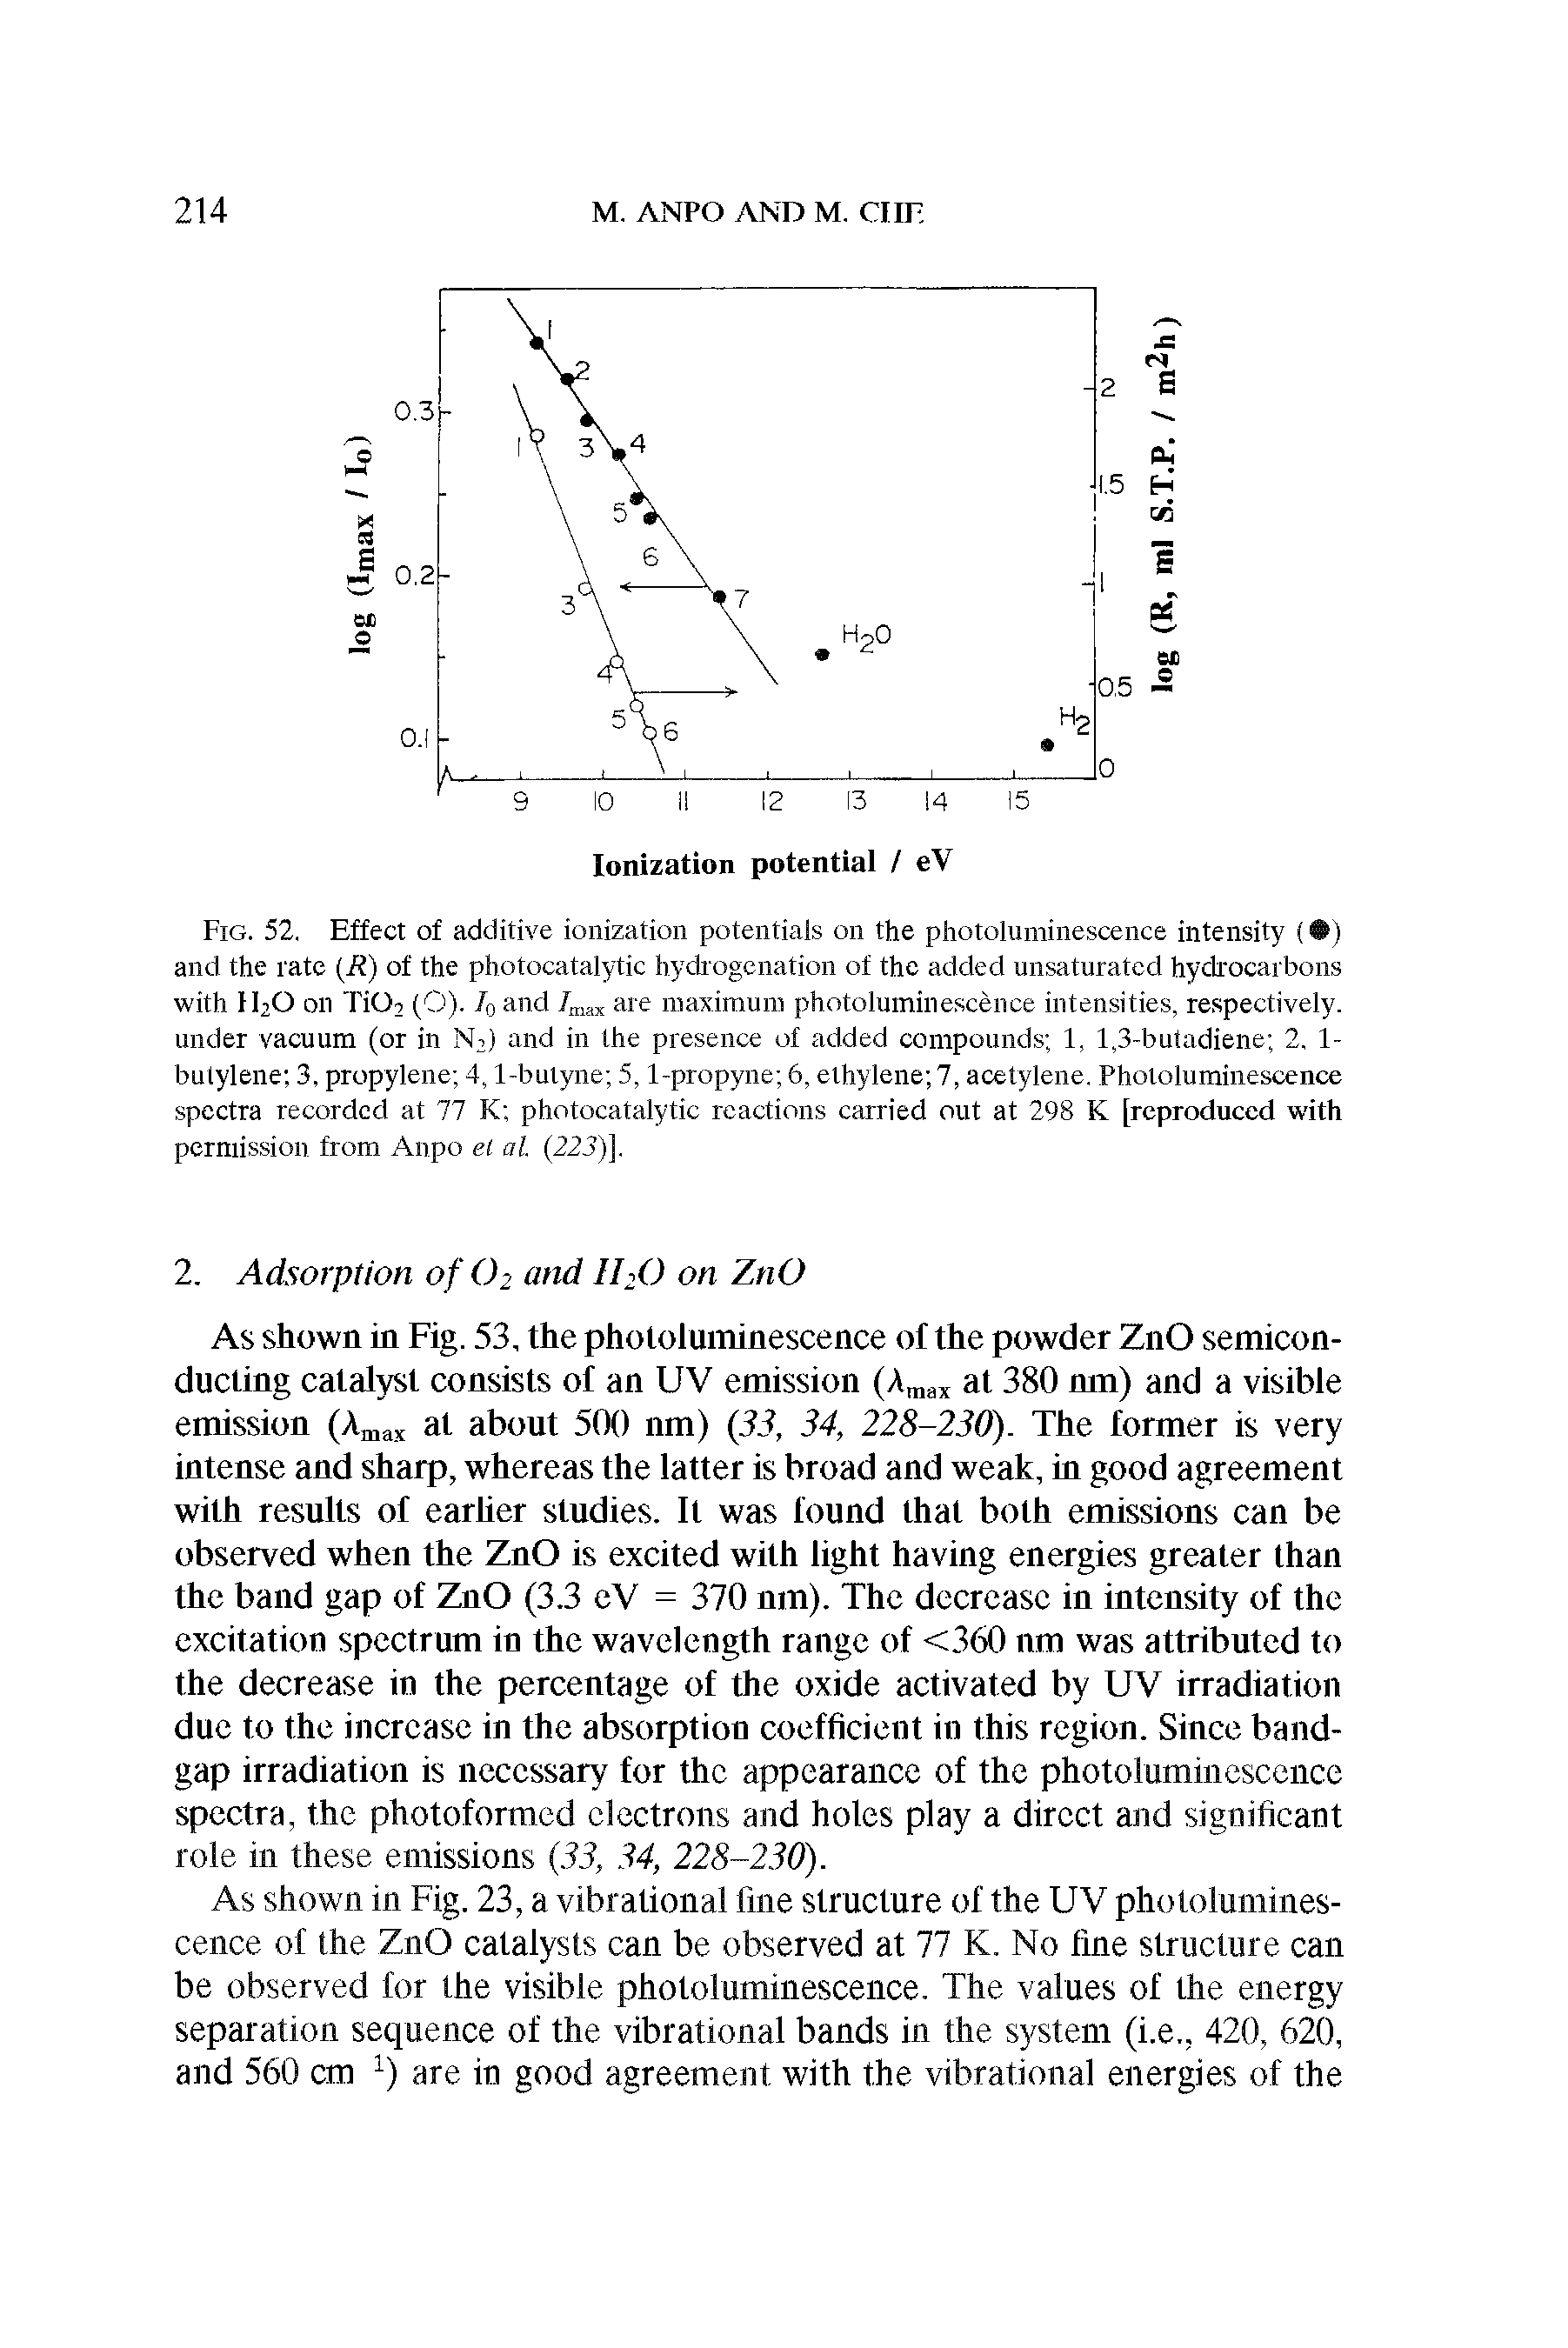 Fig. 52. Effect of additive ionization potentials on the pliotoluminescence intensity ( ) and the rate R) of the photocatalytic hydrogenation of the added unsaturated hychocarbons with H2O on TiOi (O). /q and are maximum photoluminescence intensities, respectively, under vacuum (or in Ni) and in the presence of added compounds 1, 1,3-butadiene 2, 1-butylene 3, propylene 4,1-butyne 5,1-propyne 6, ethylene 7, acetylene. Photoluminescence spectra recorded at 77 K photocatalytic reactions carried out at 298 K [reproduced with permission from Anpo el al. (223)].